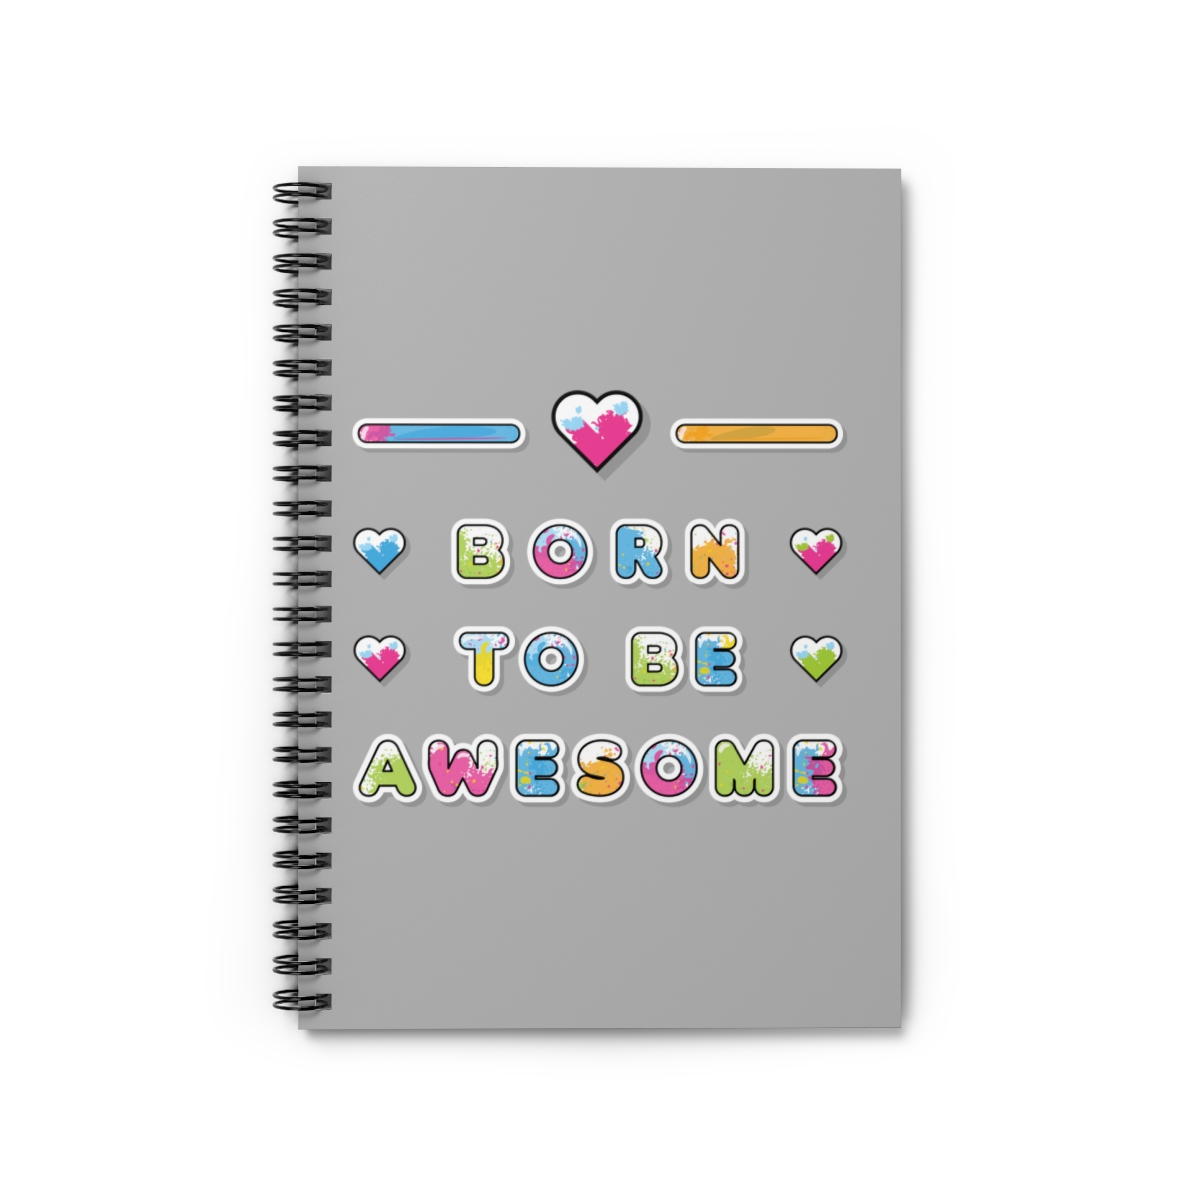 You are Awesome Spiral Notebook product main image